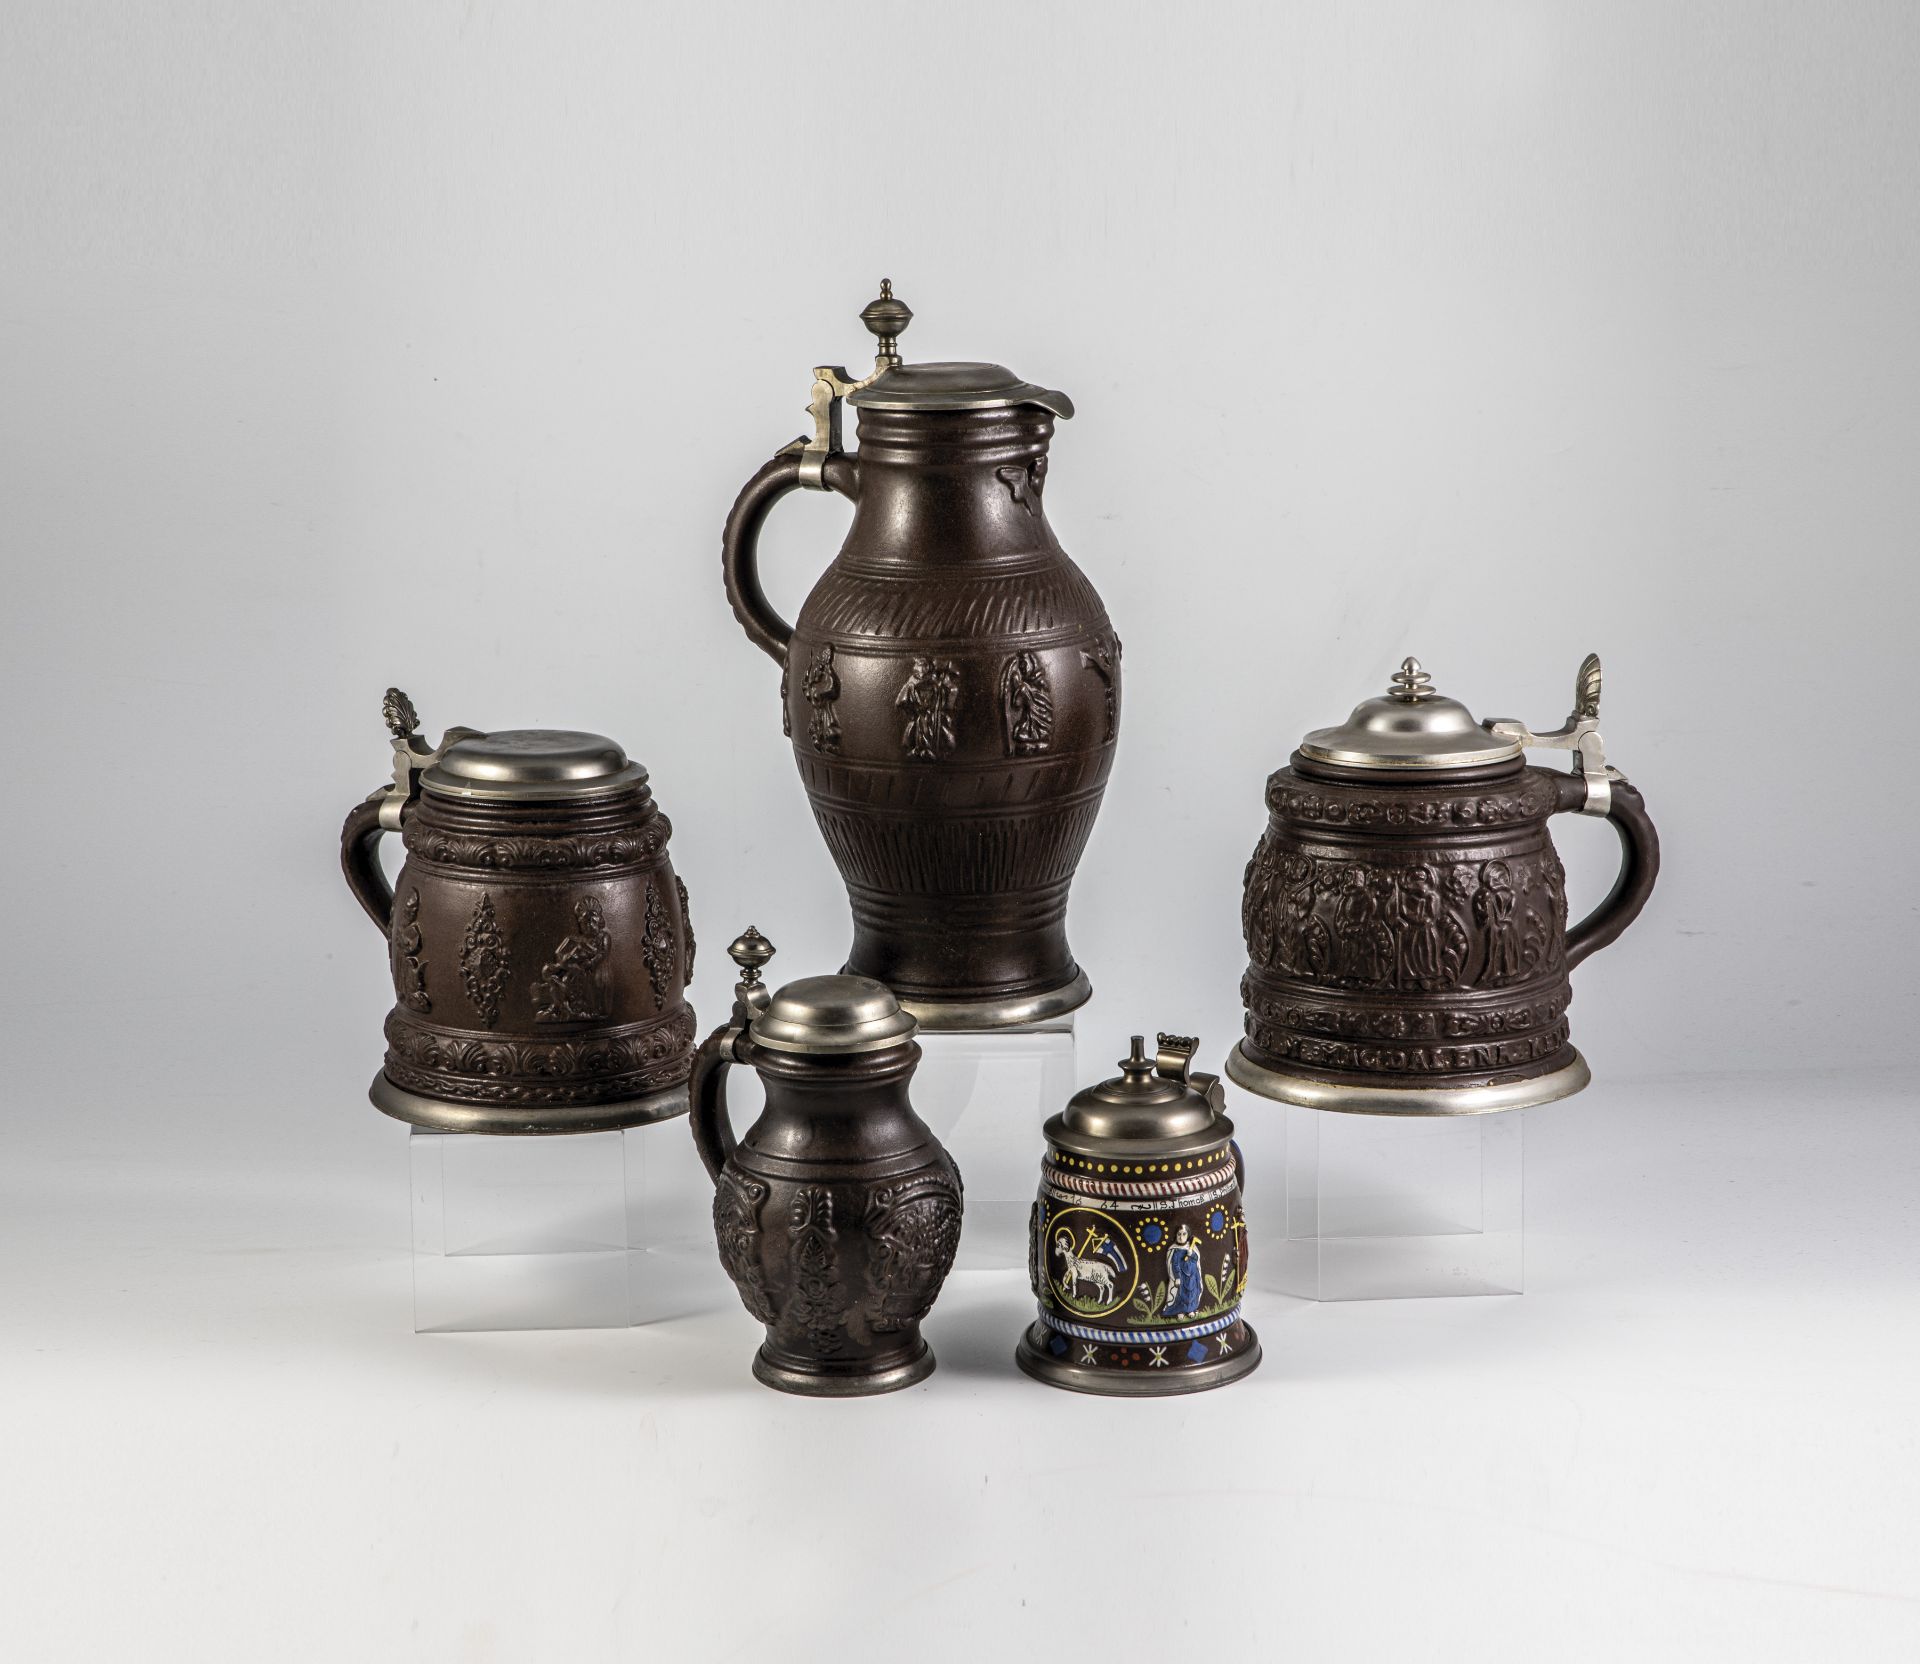 Three jugs and one apothecary bottle with relief overlays